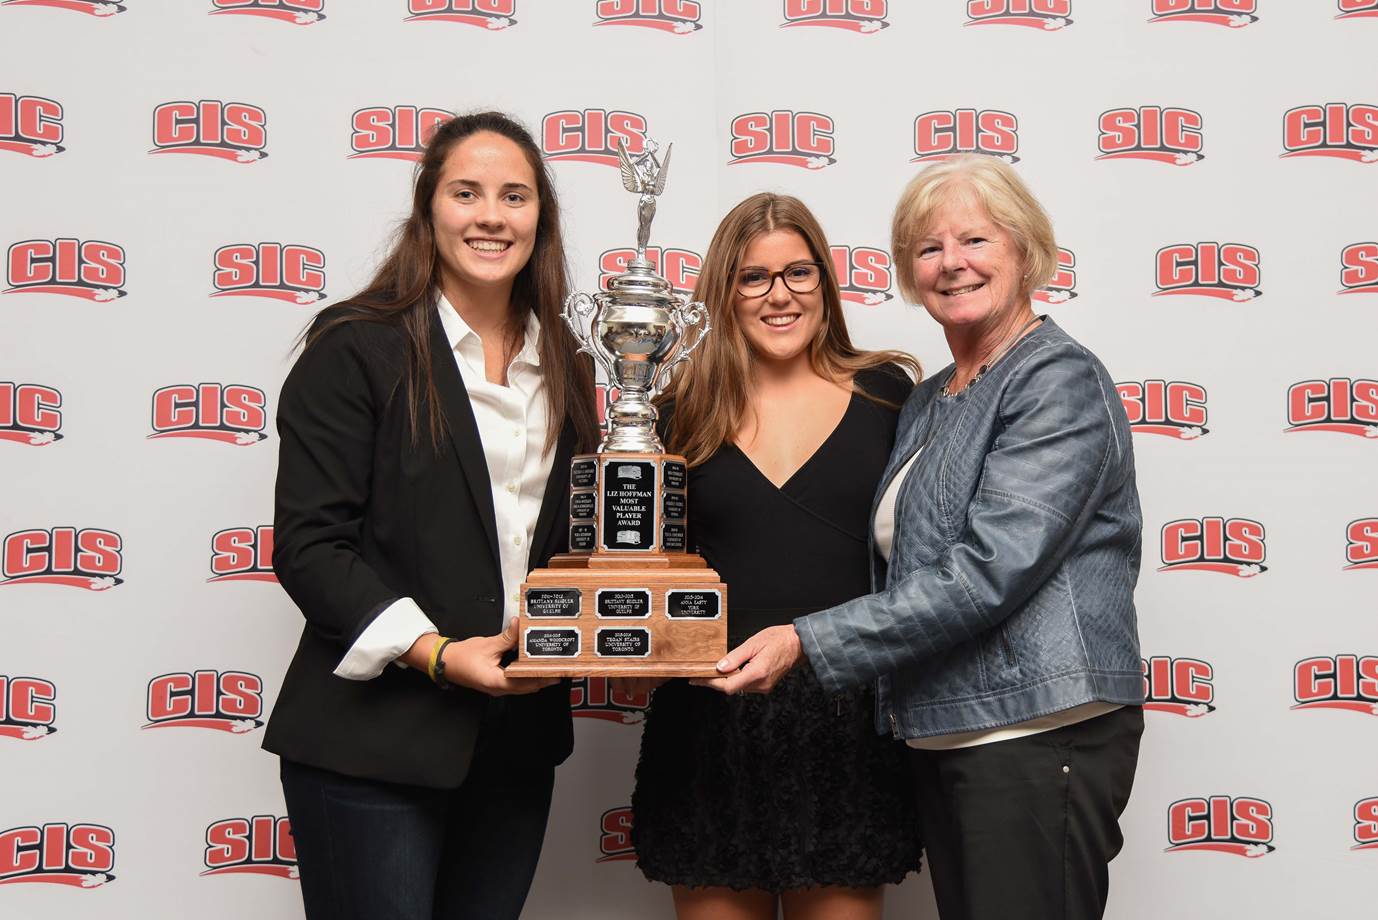 U Sports women’s field hockey: UBC’s Donohoe & Guelph’s Lane named players of the year